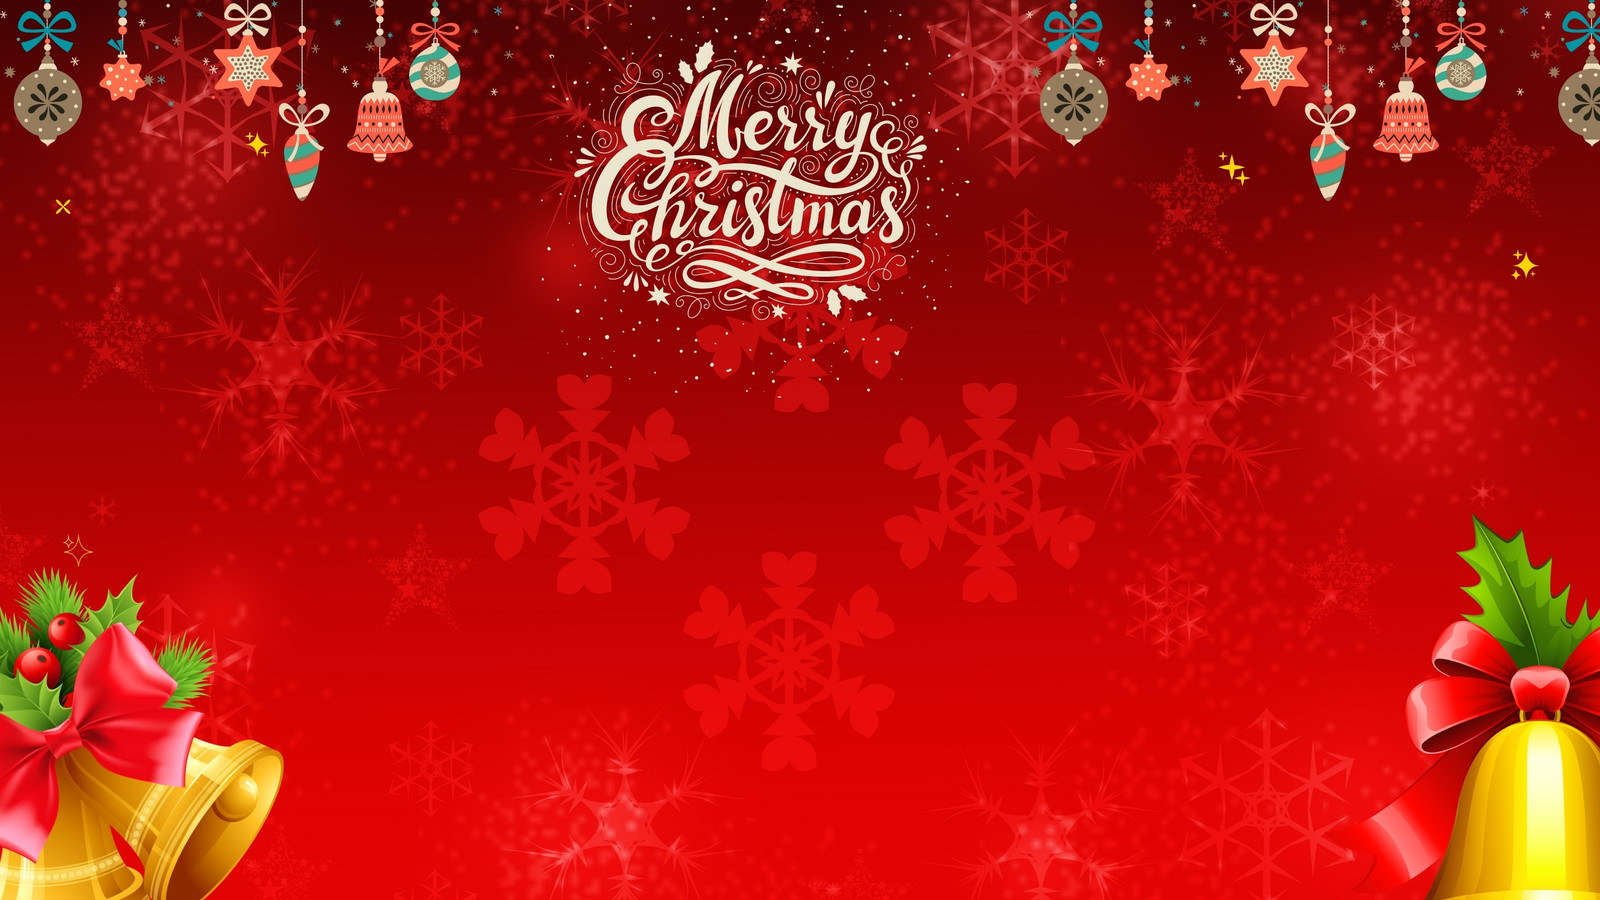 Free Christmas Zoom virtual background templates | Canva